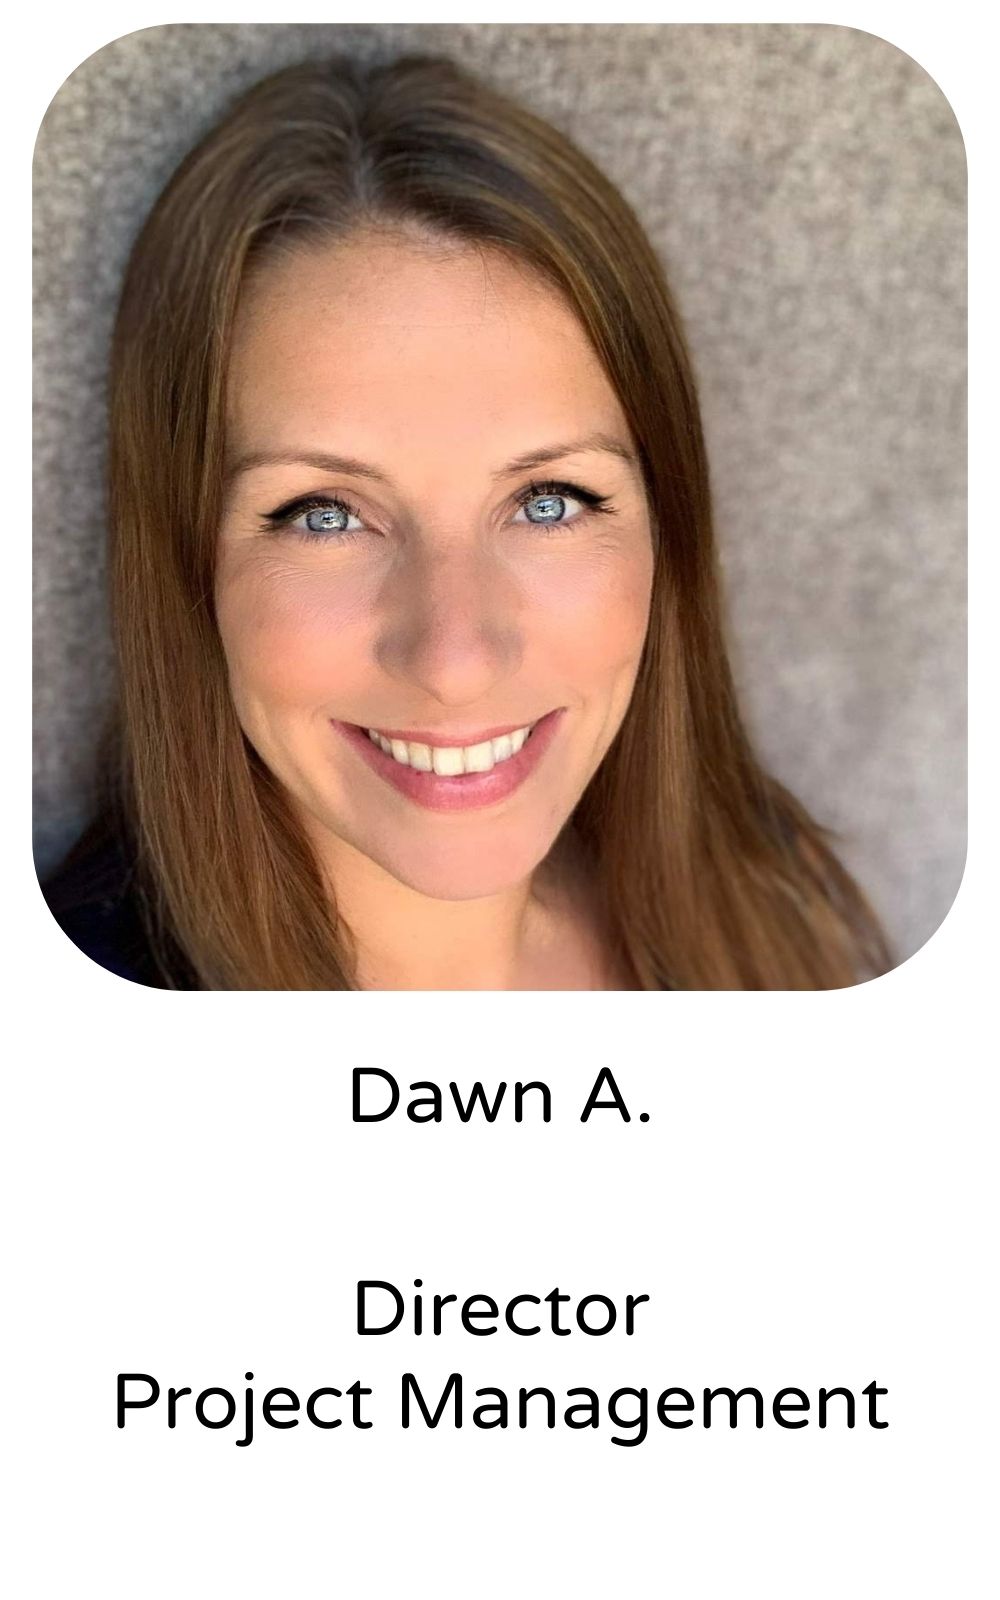 Dawn A, Director, Project Management